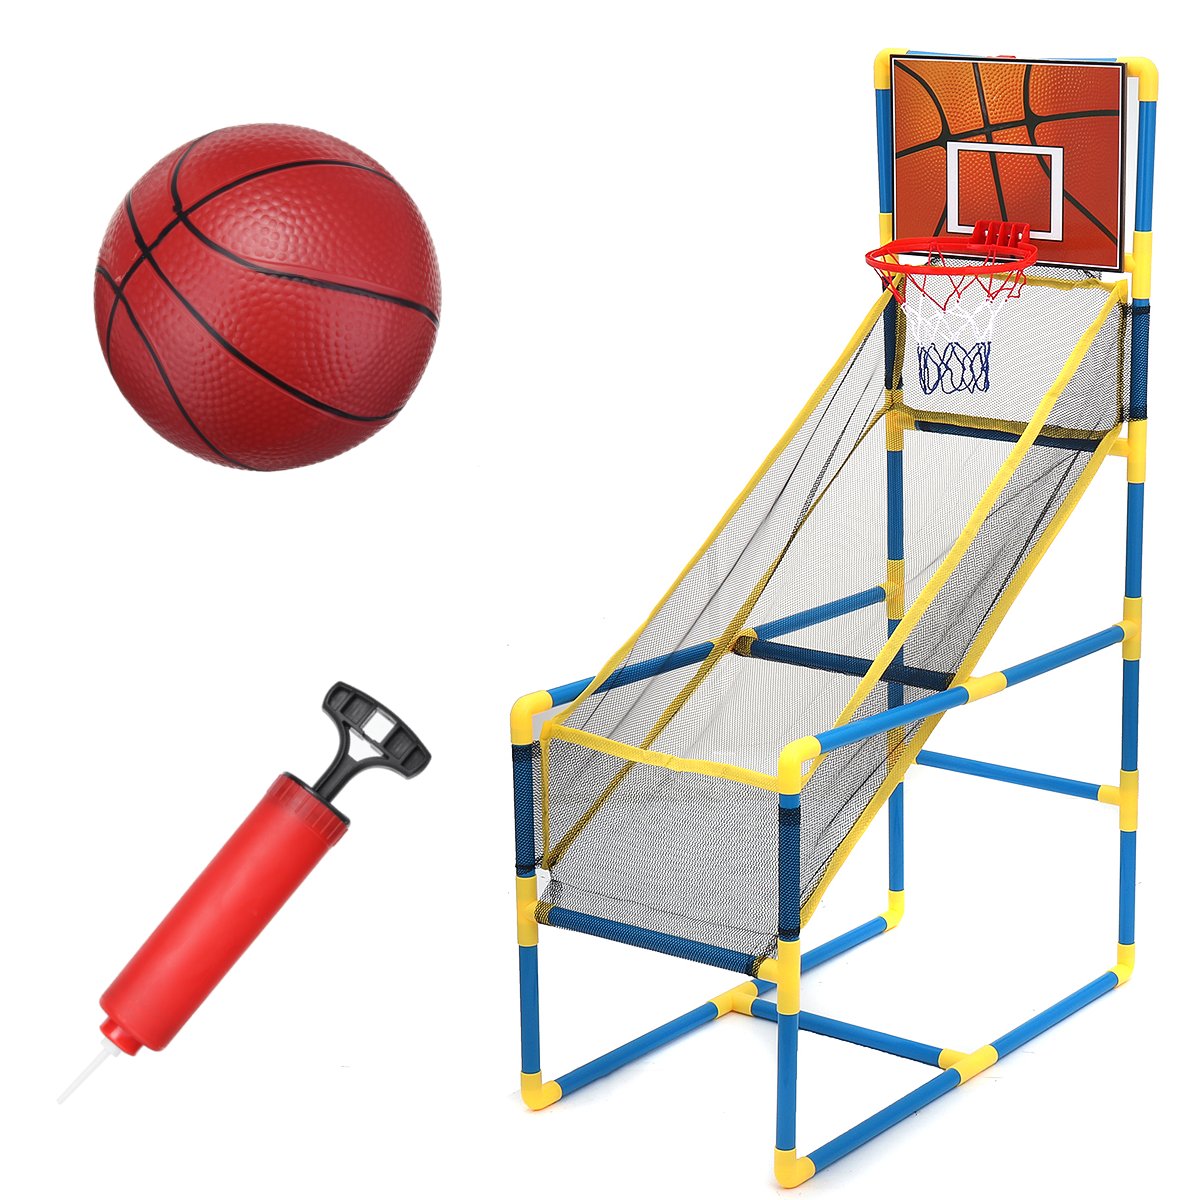 Children-Lightweight-Portable-Easy-Assemble-Basketball-Stand-Adjustable-Indoor-Outdoor-Sports-Toys-w-1829730-3